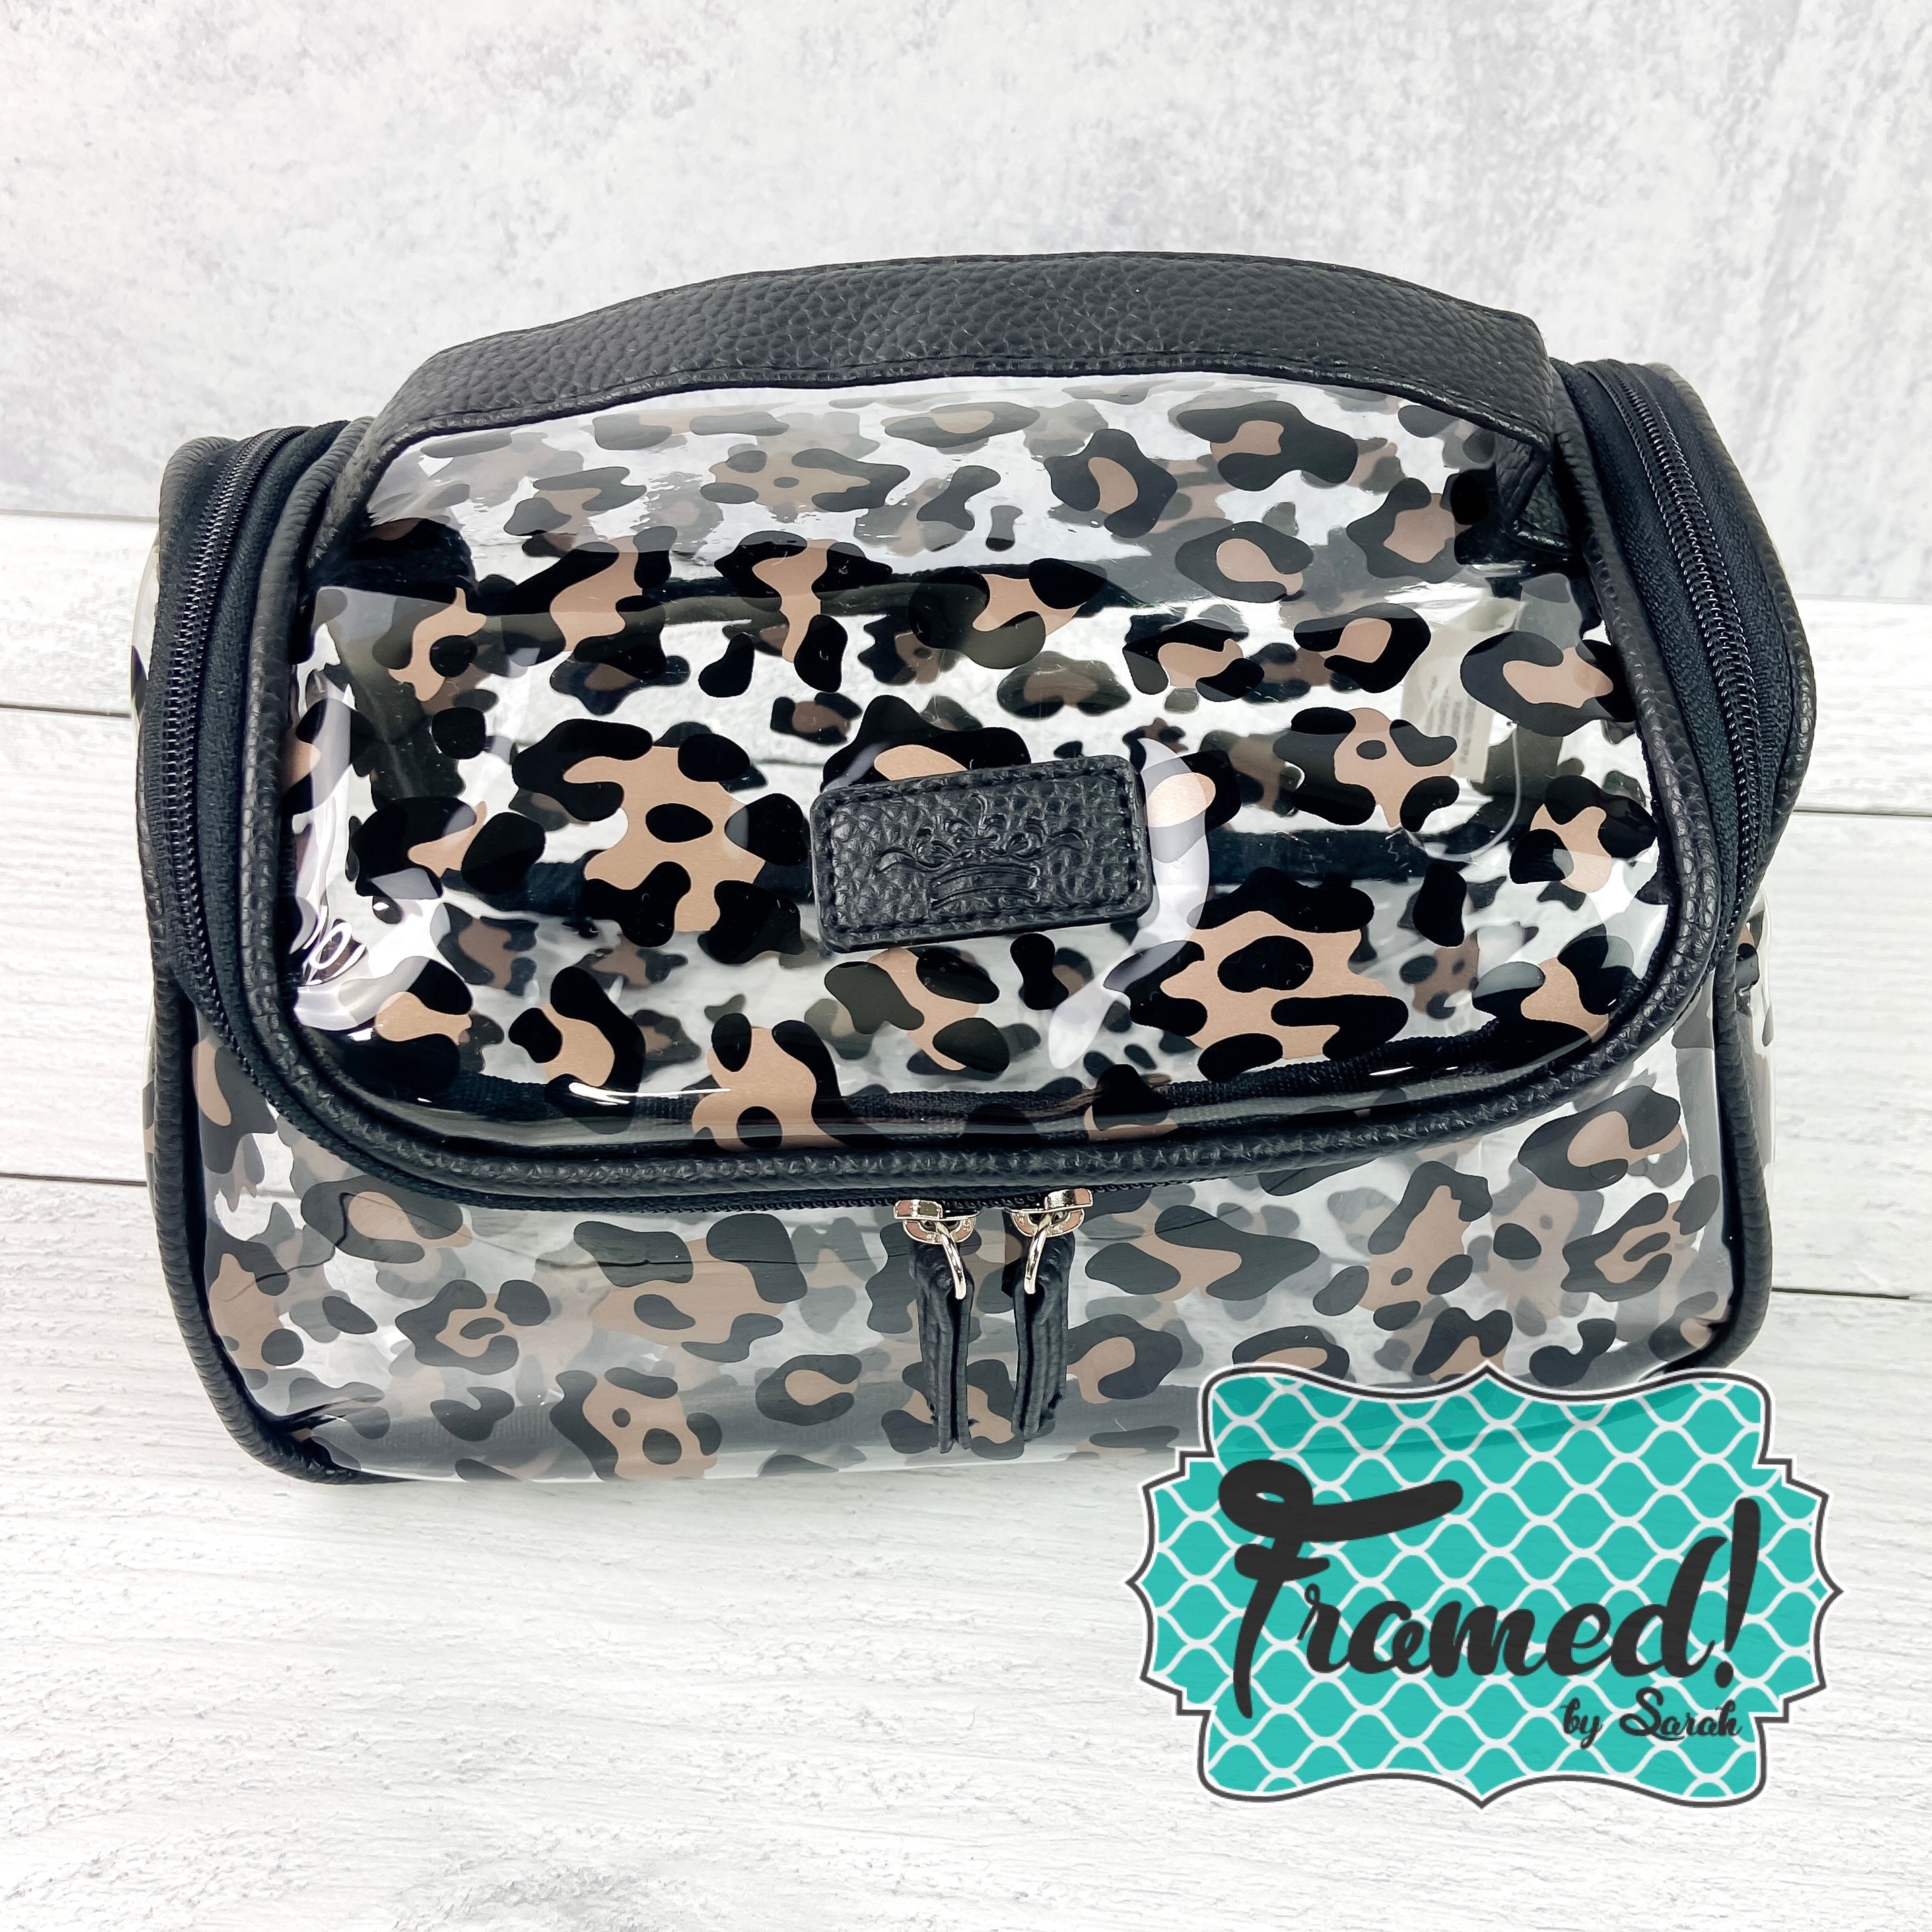 Leopard Travel Cosmetic Bag